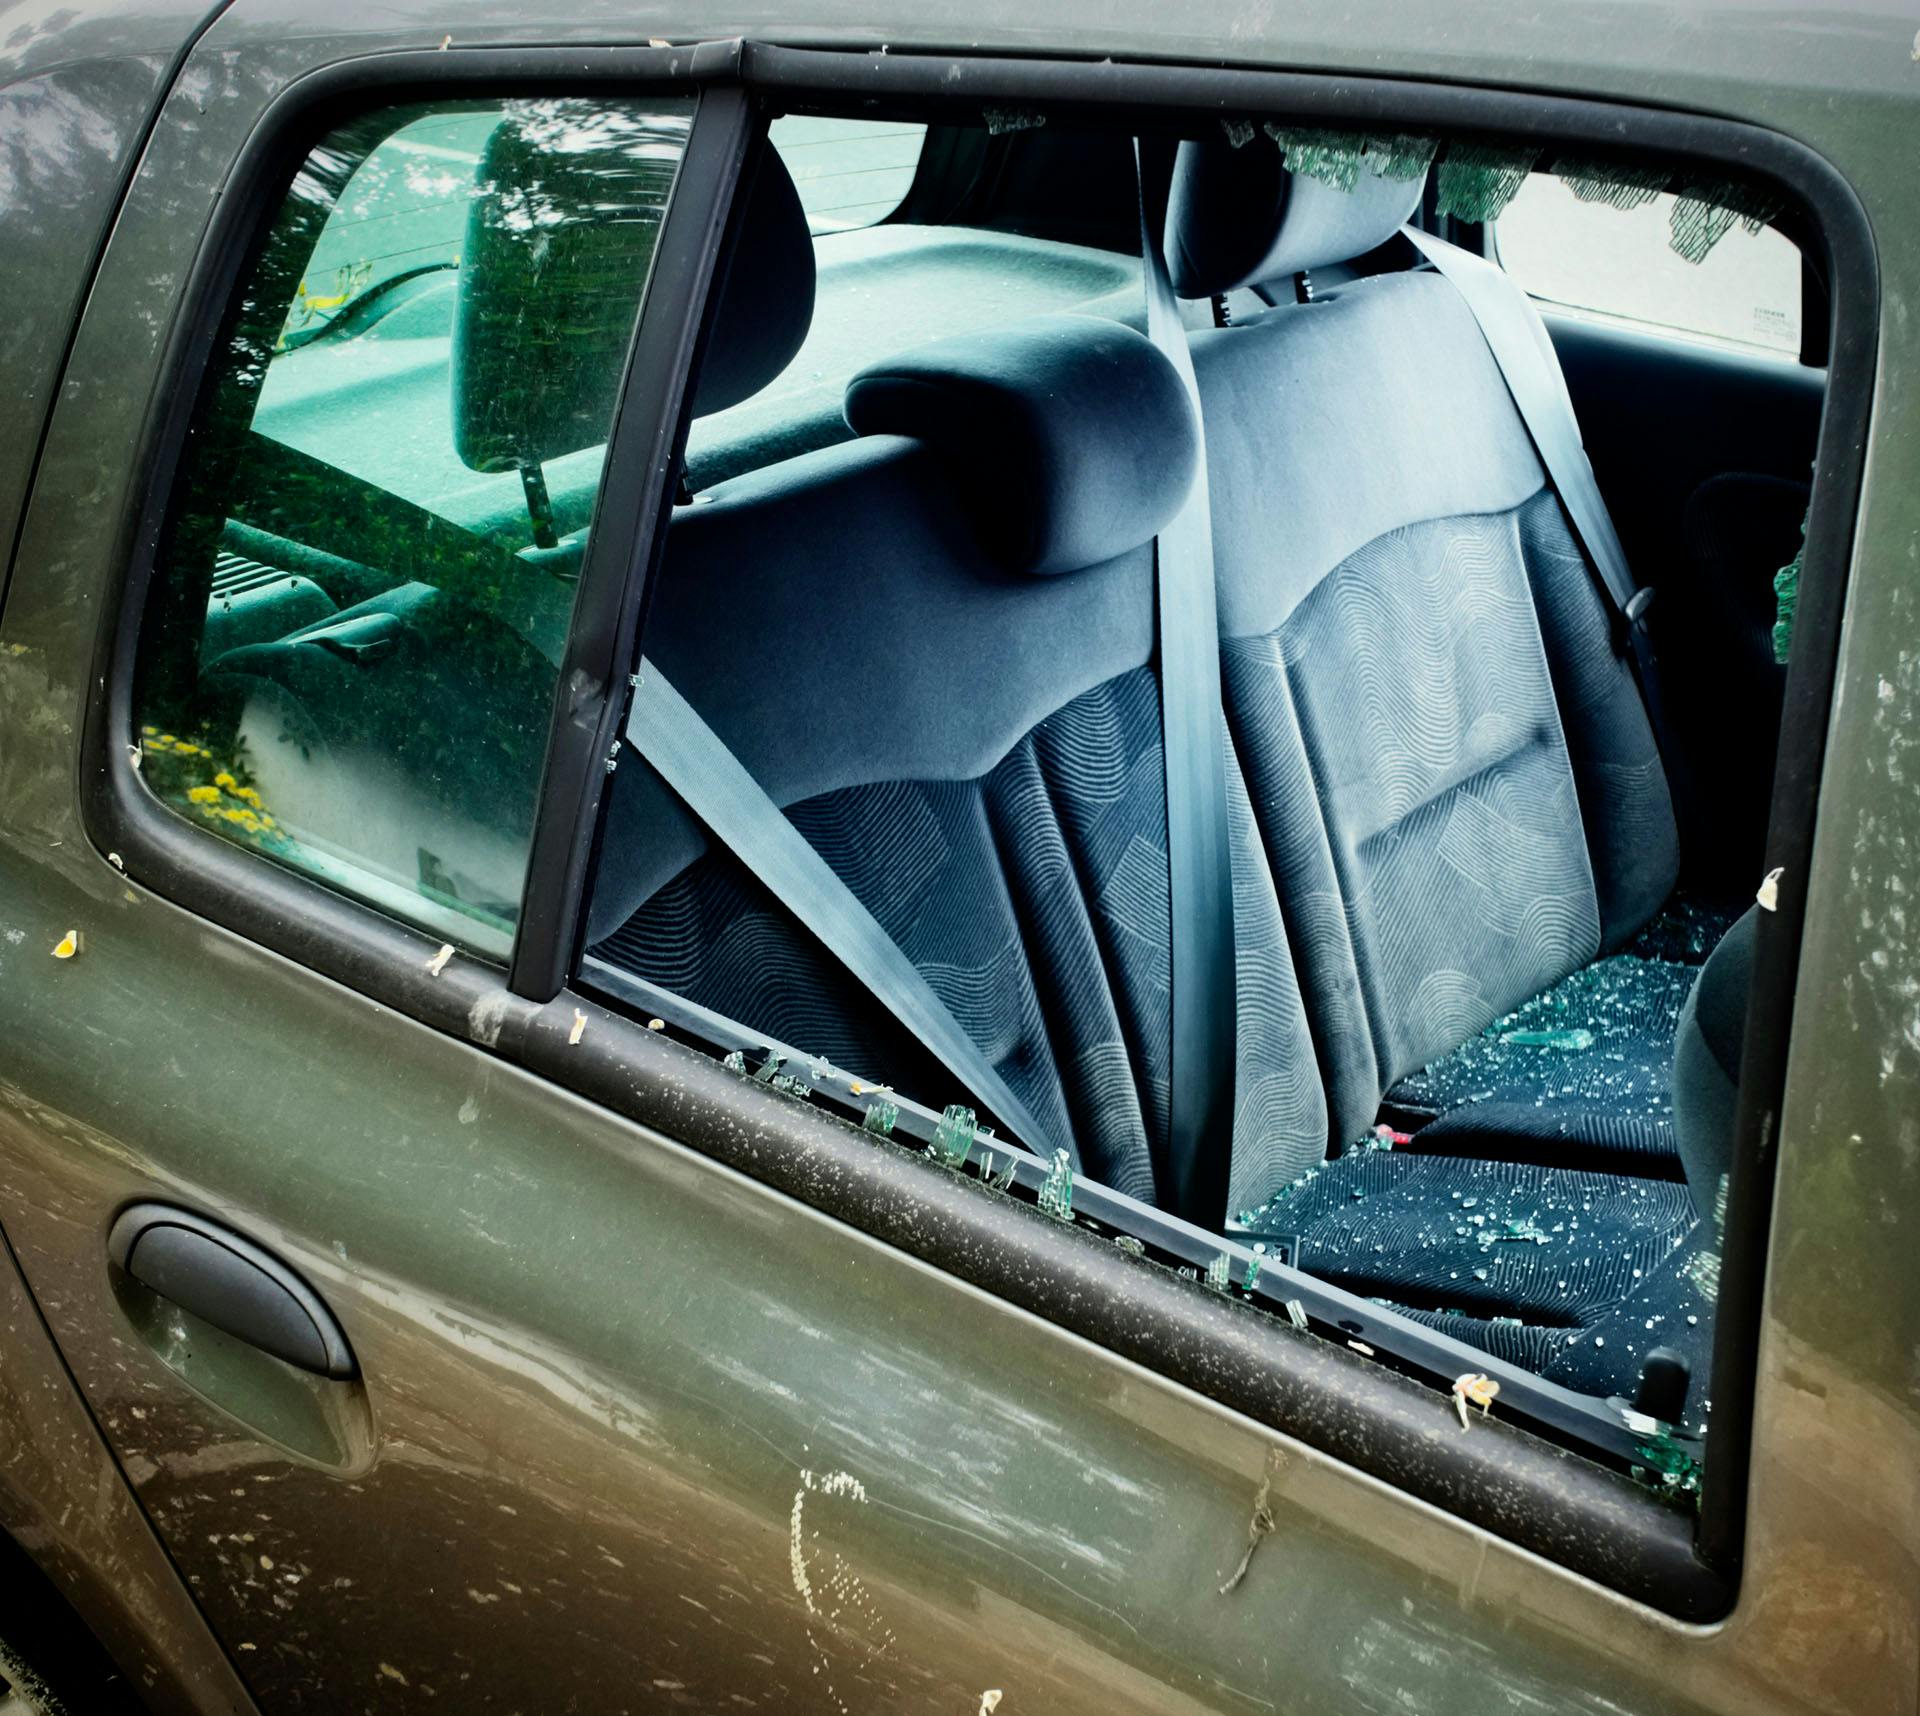 Car with backseat window shattered